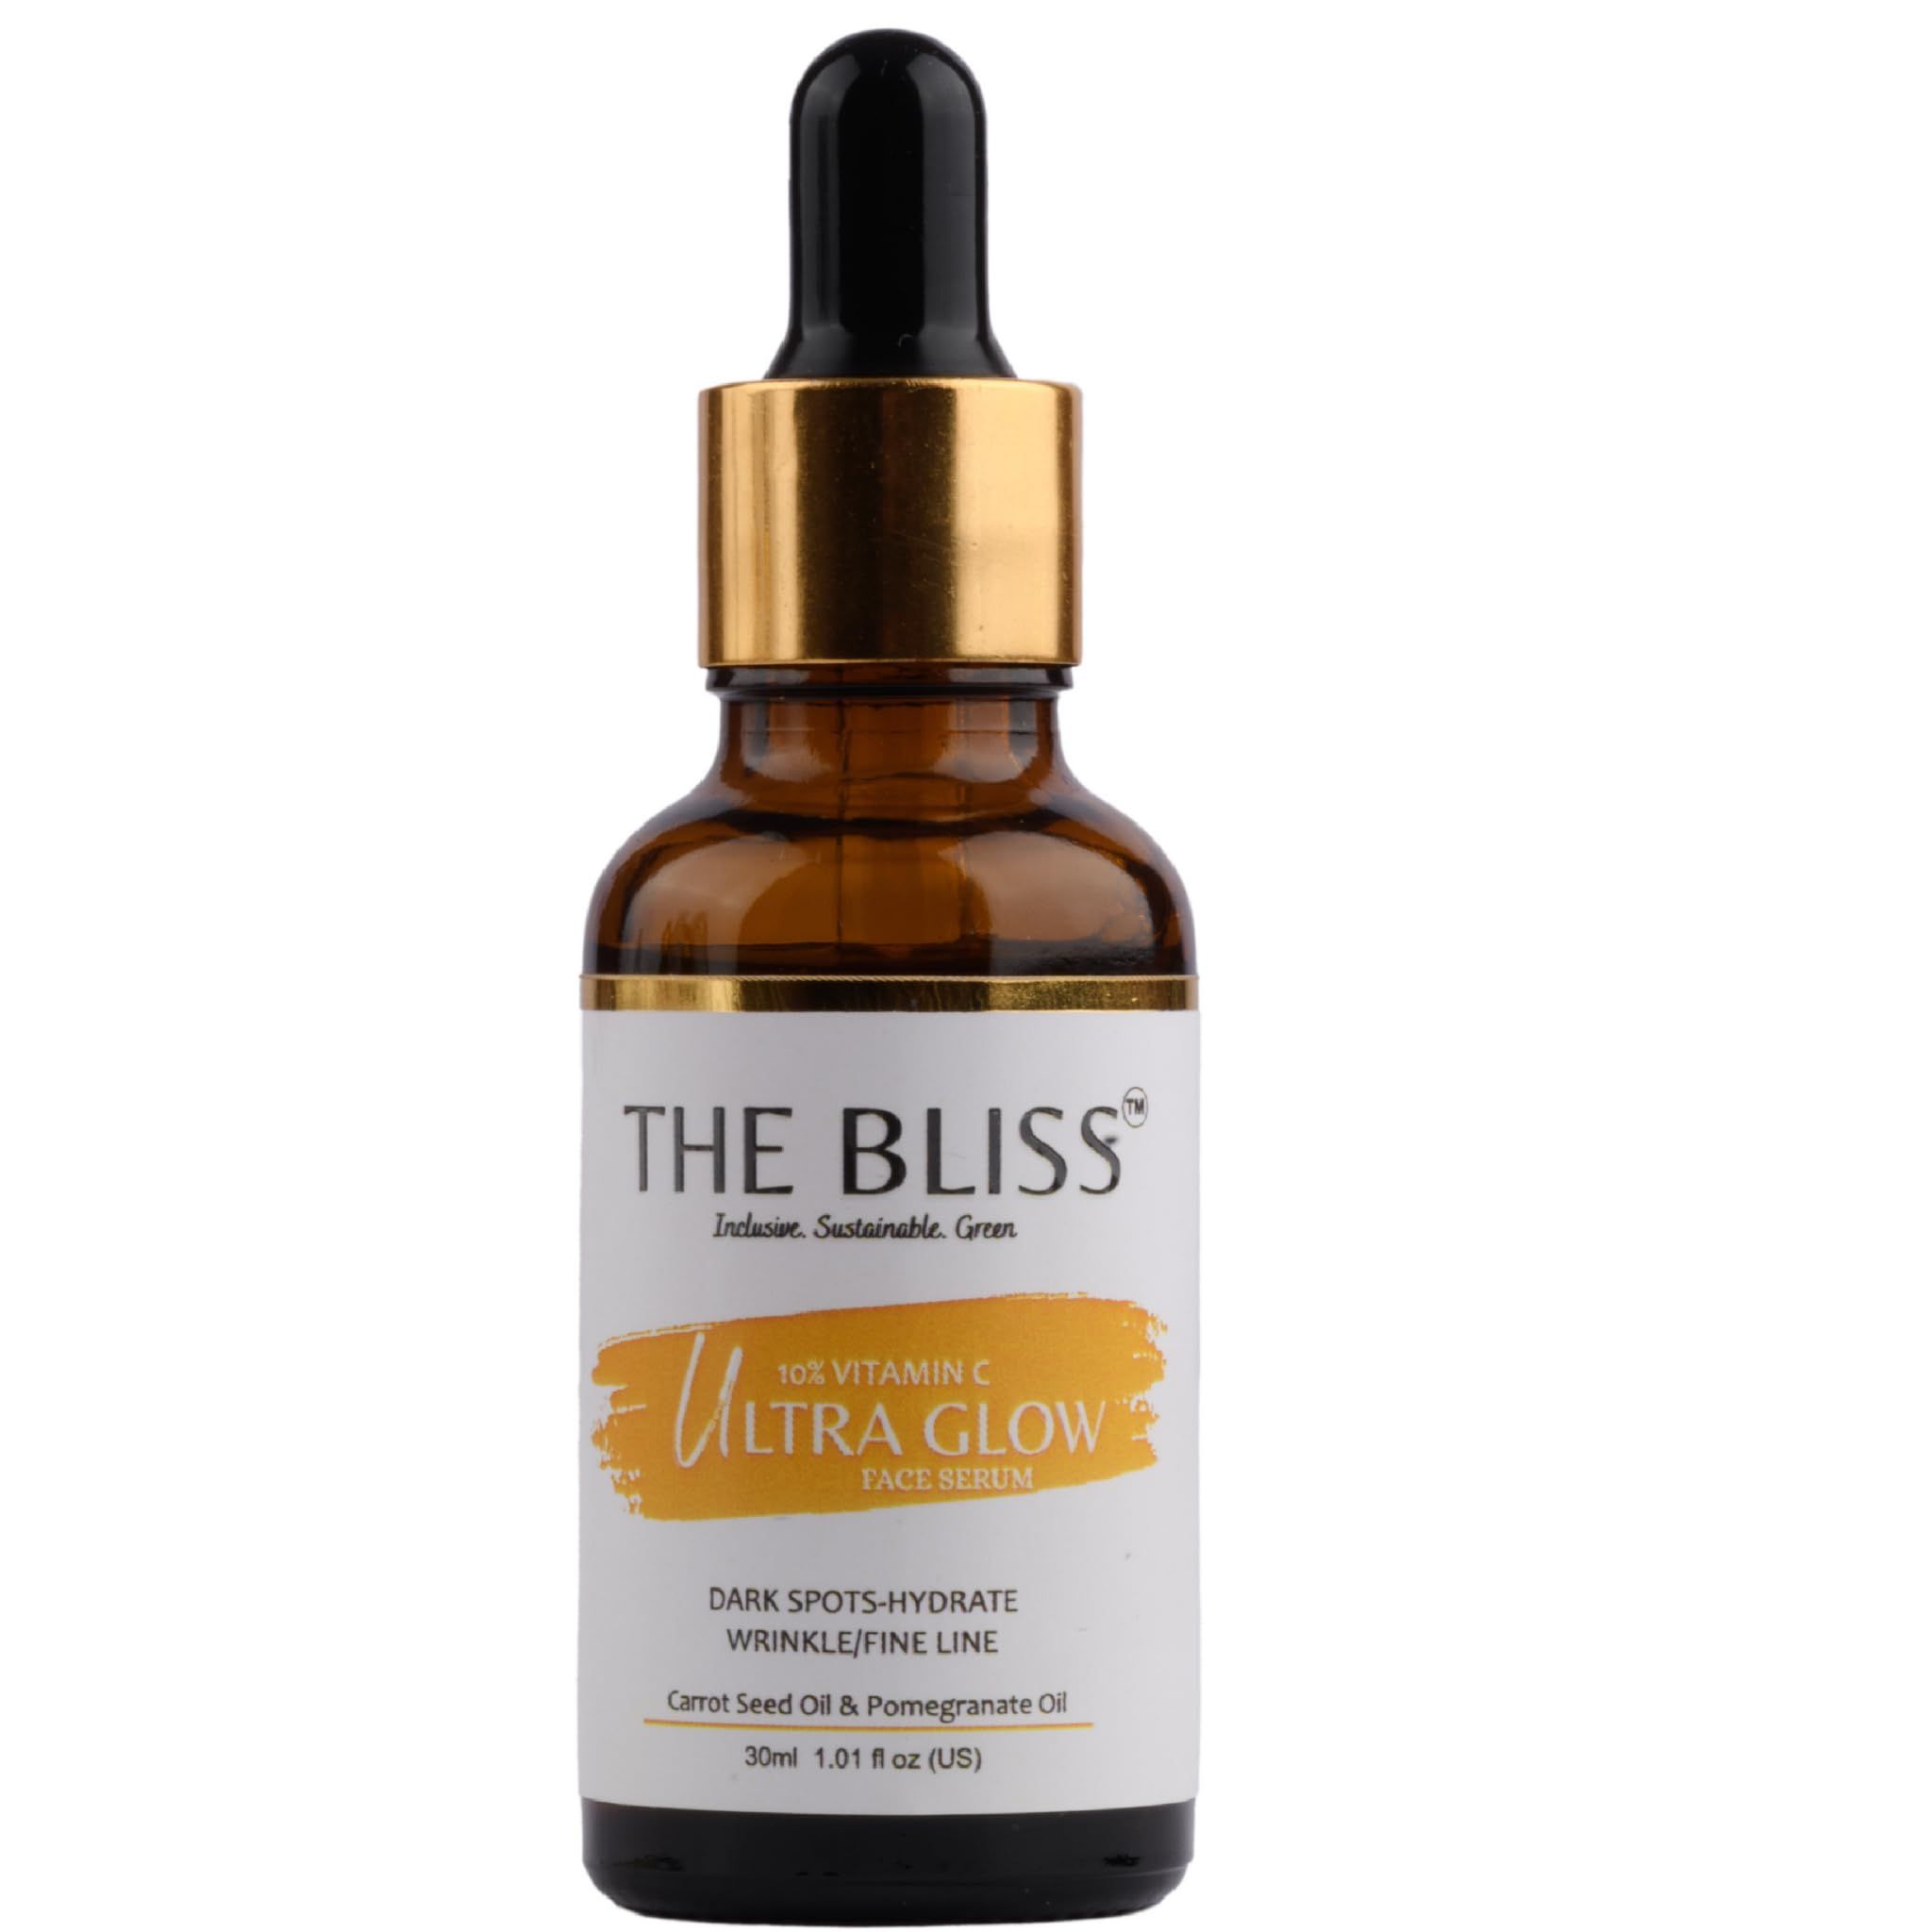 The Bliss 10% Vitamic C Face Serum (Plant-Based) for Glowing Skin (Beginner Friendly Potent Vit C Formula), Instant Glow on Skin and Reduces Spots Overtime, Bright Complete Vitamin C Booster, 30 ml